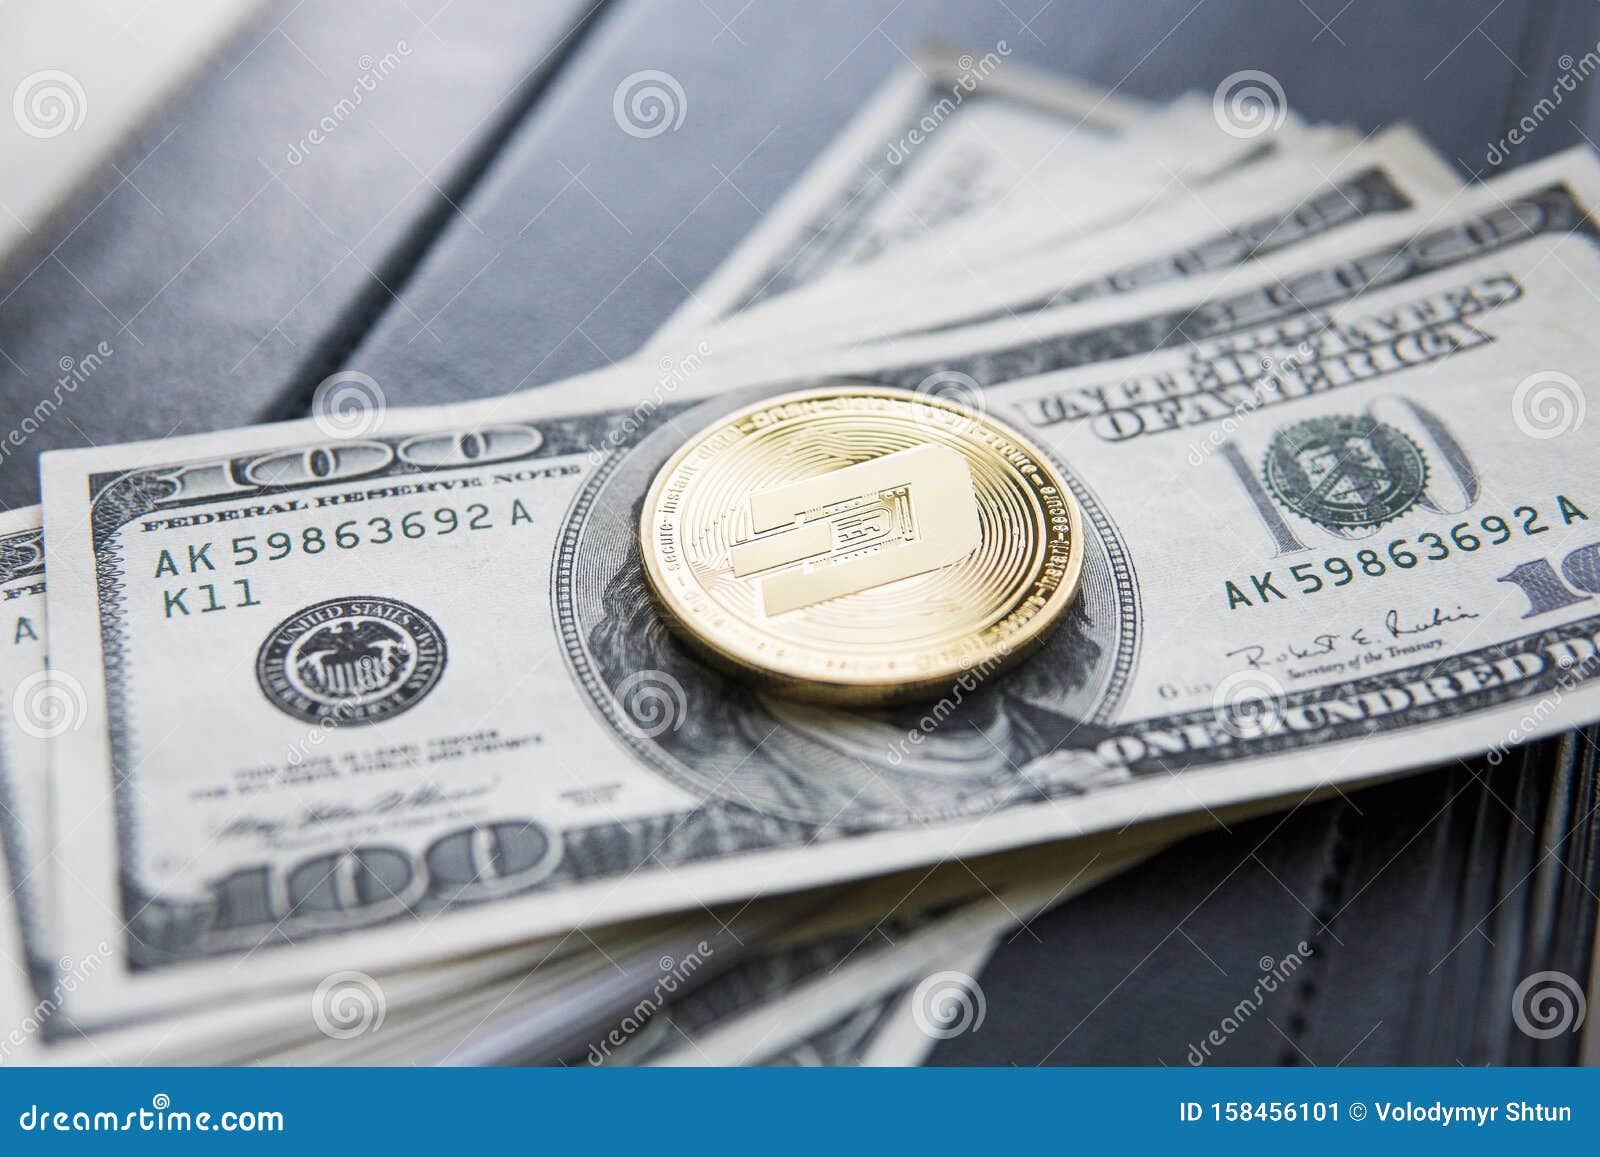 Golden Dash Cryptocurrency Coin On A Pile Of US Dollars ...